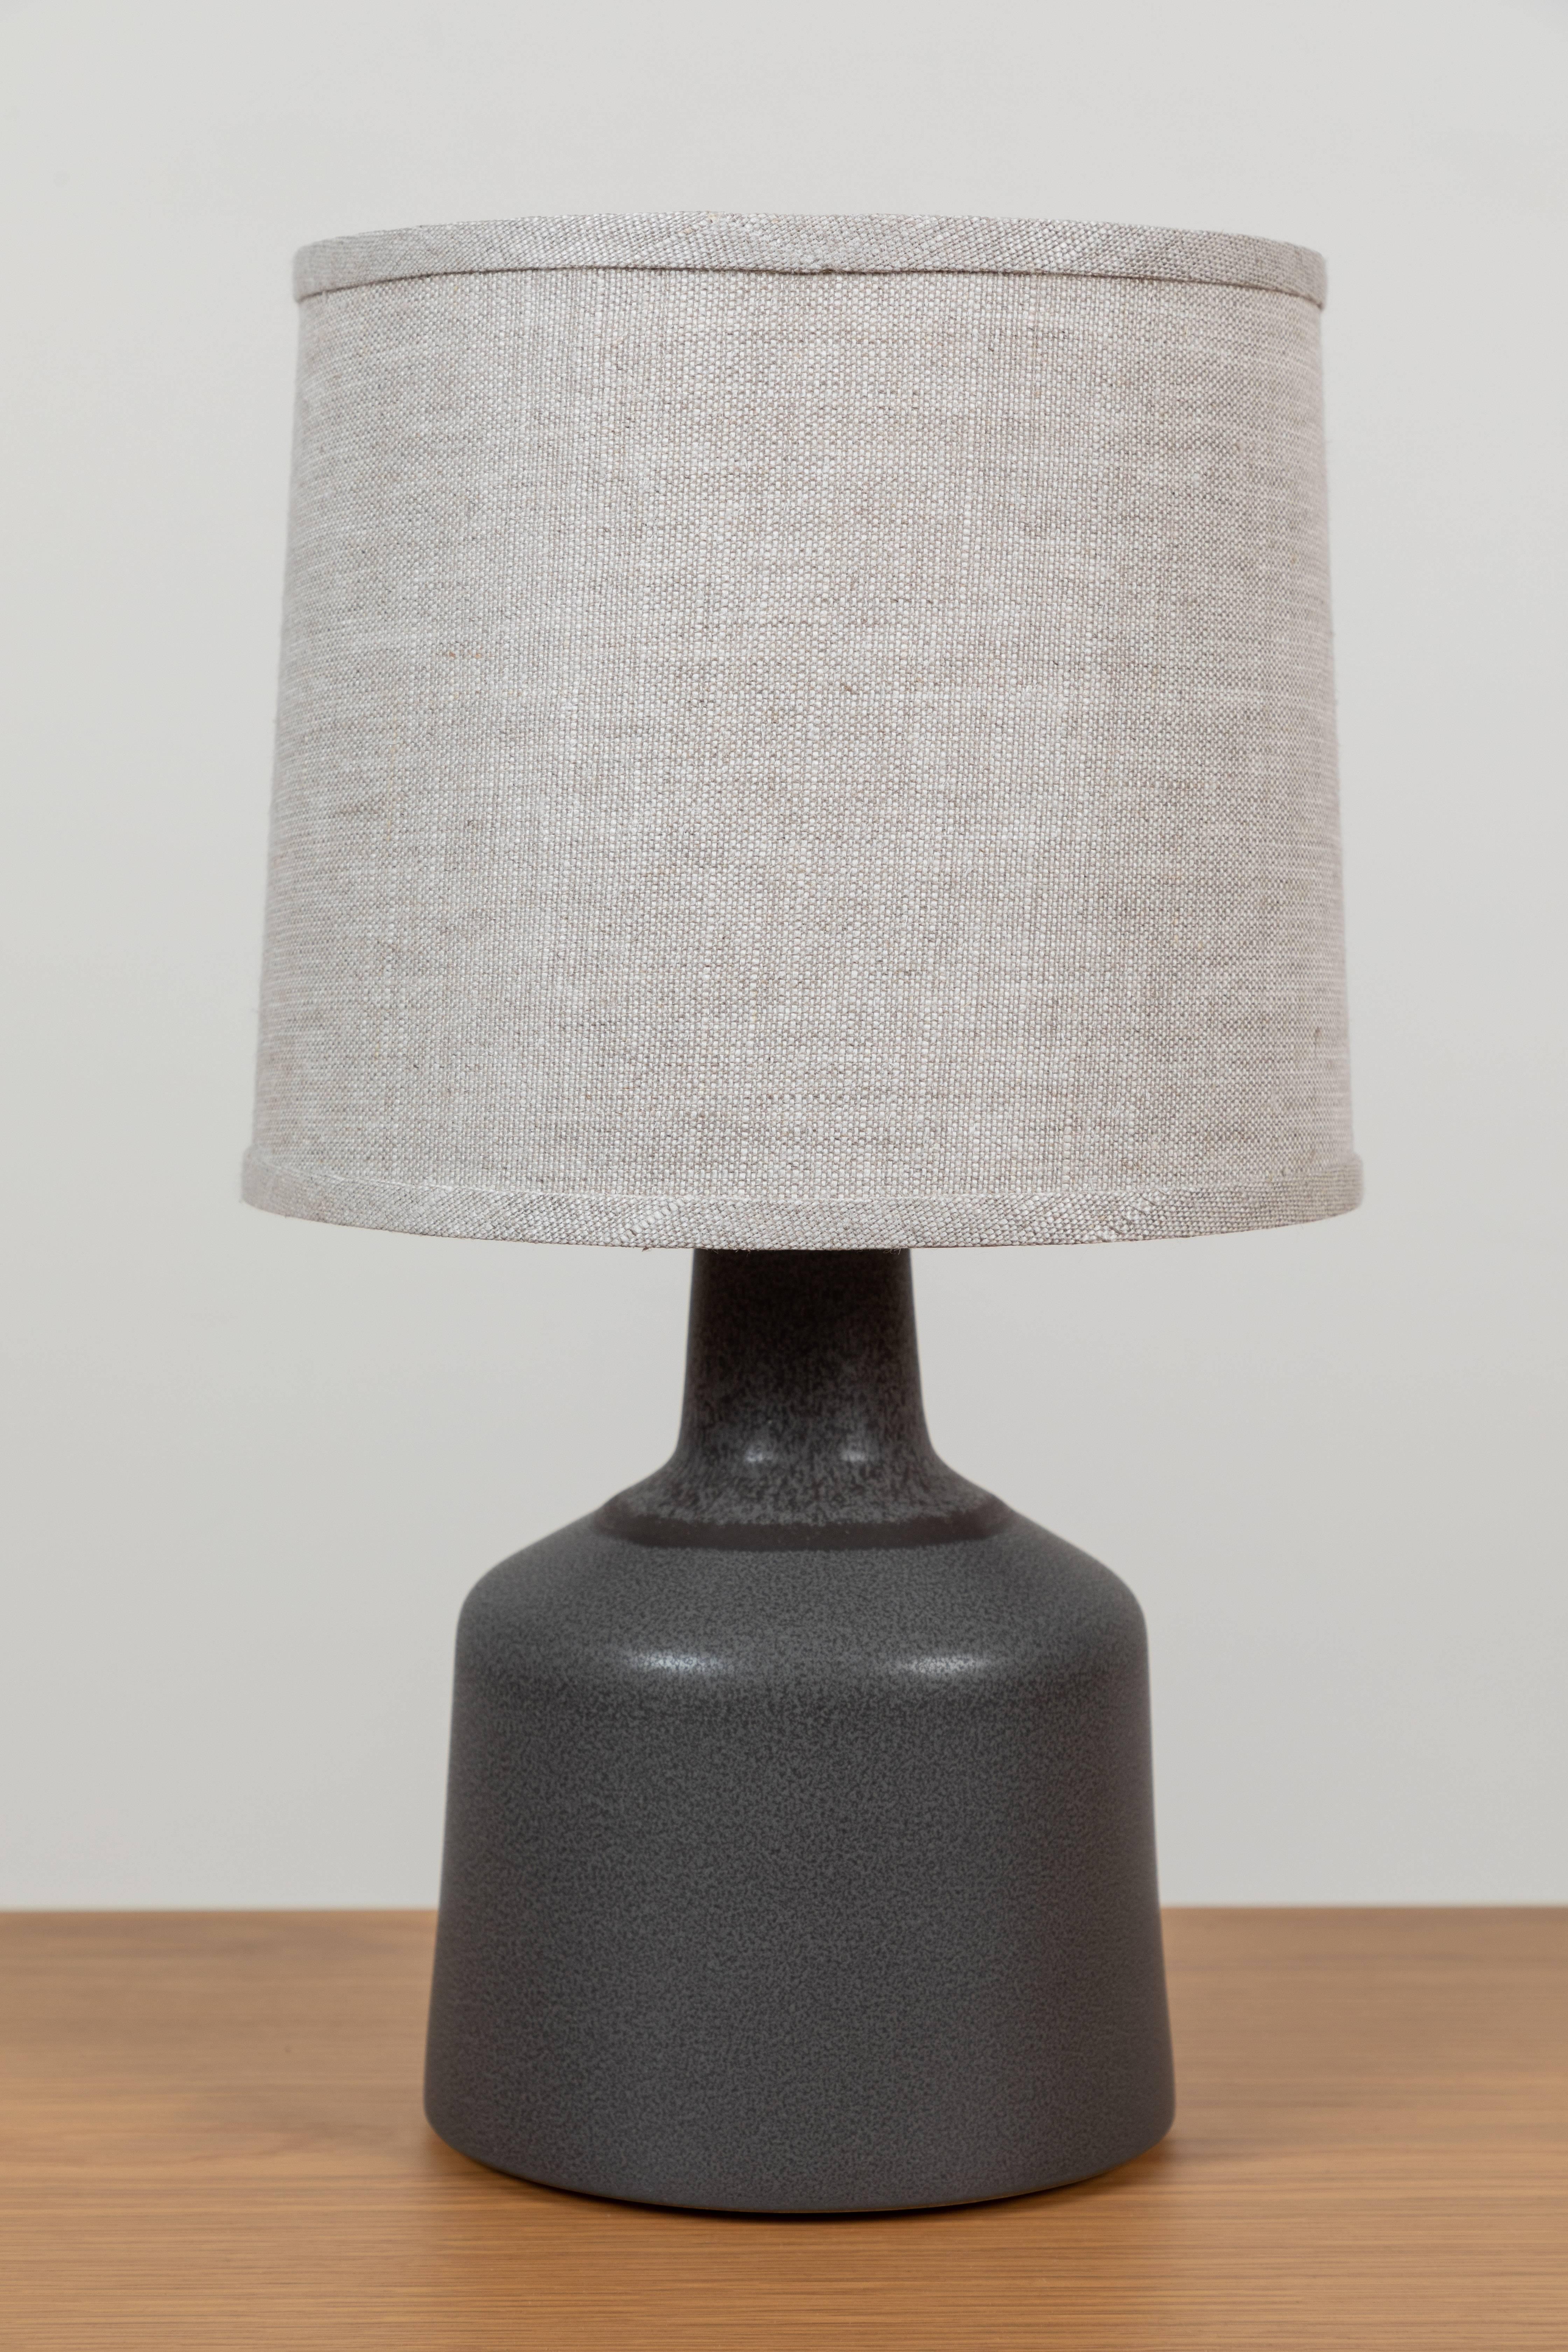 Pair of Martin lamps by Stone and Sawyer for Lawson-Fenning.